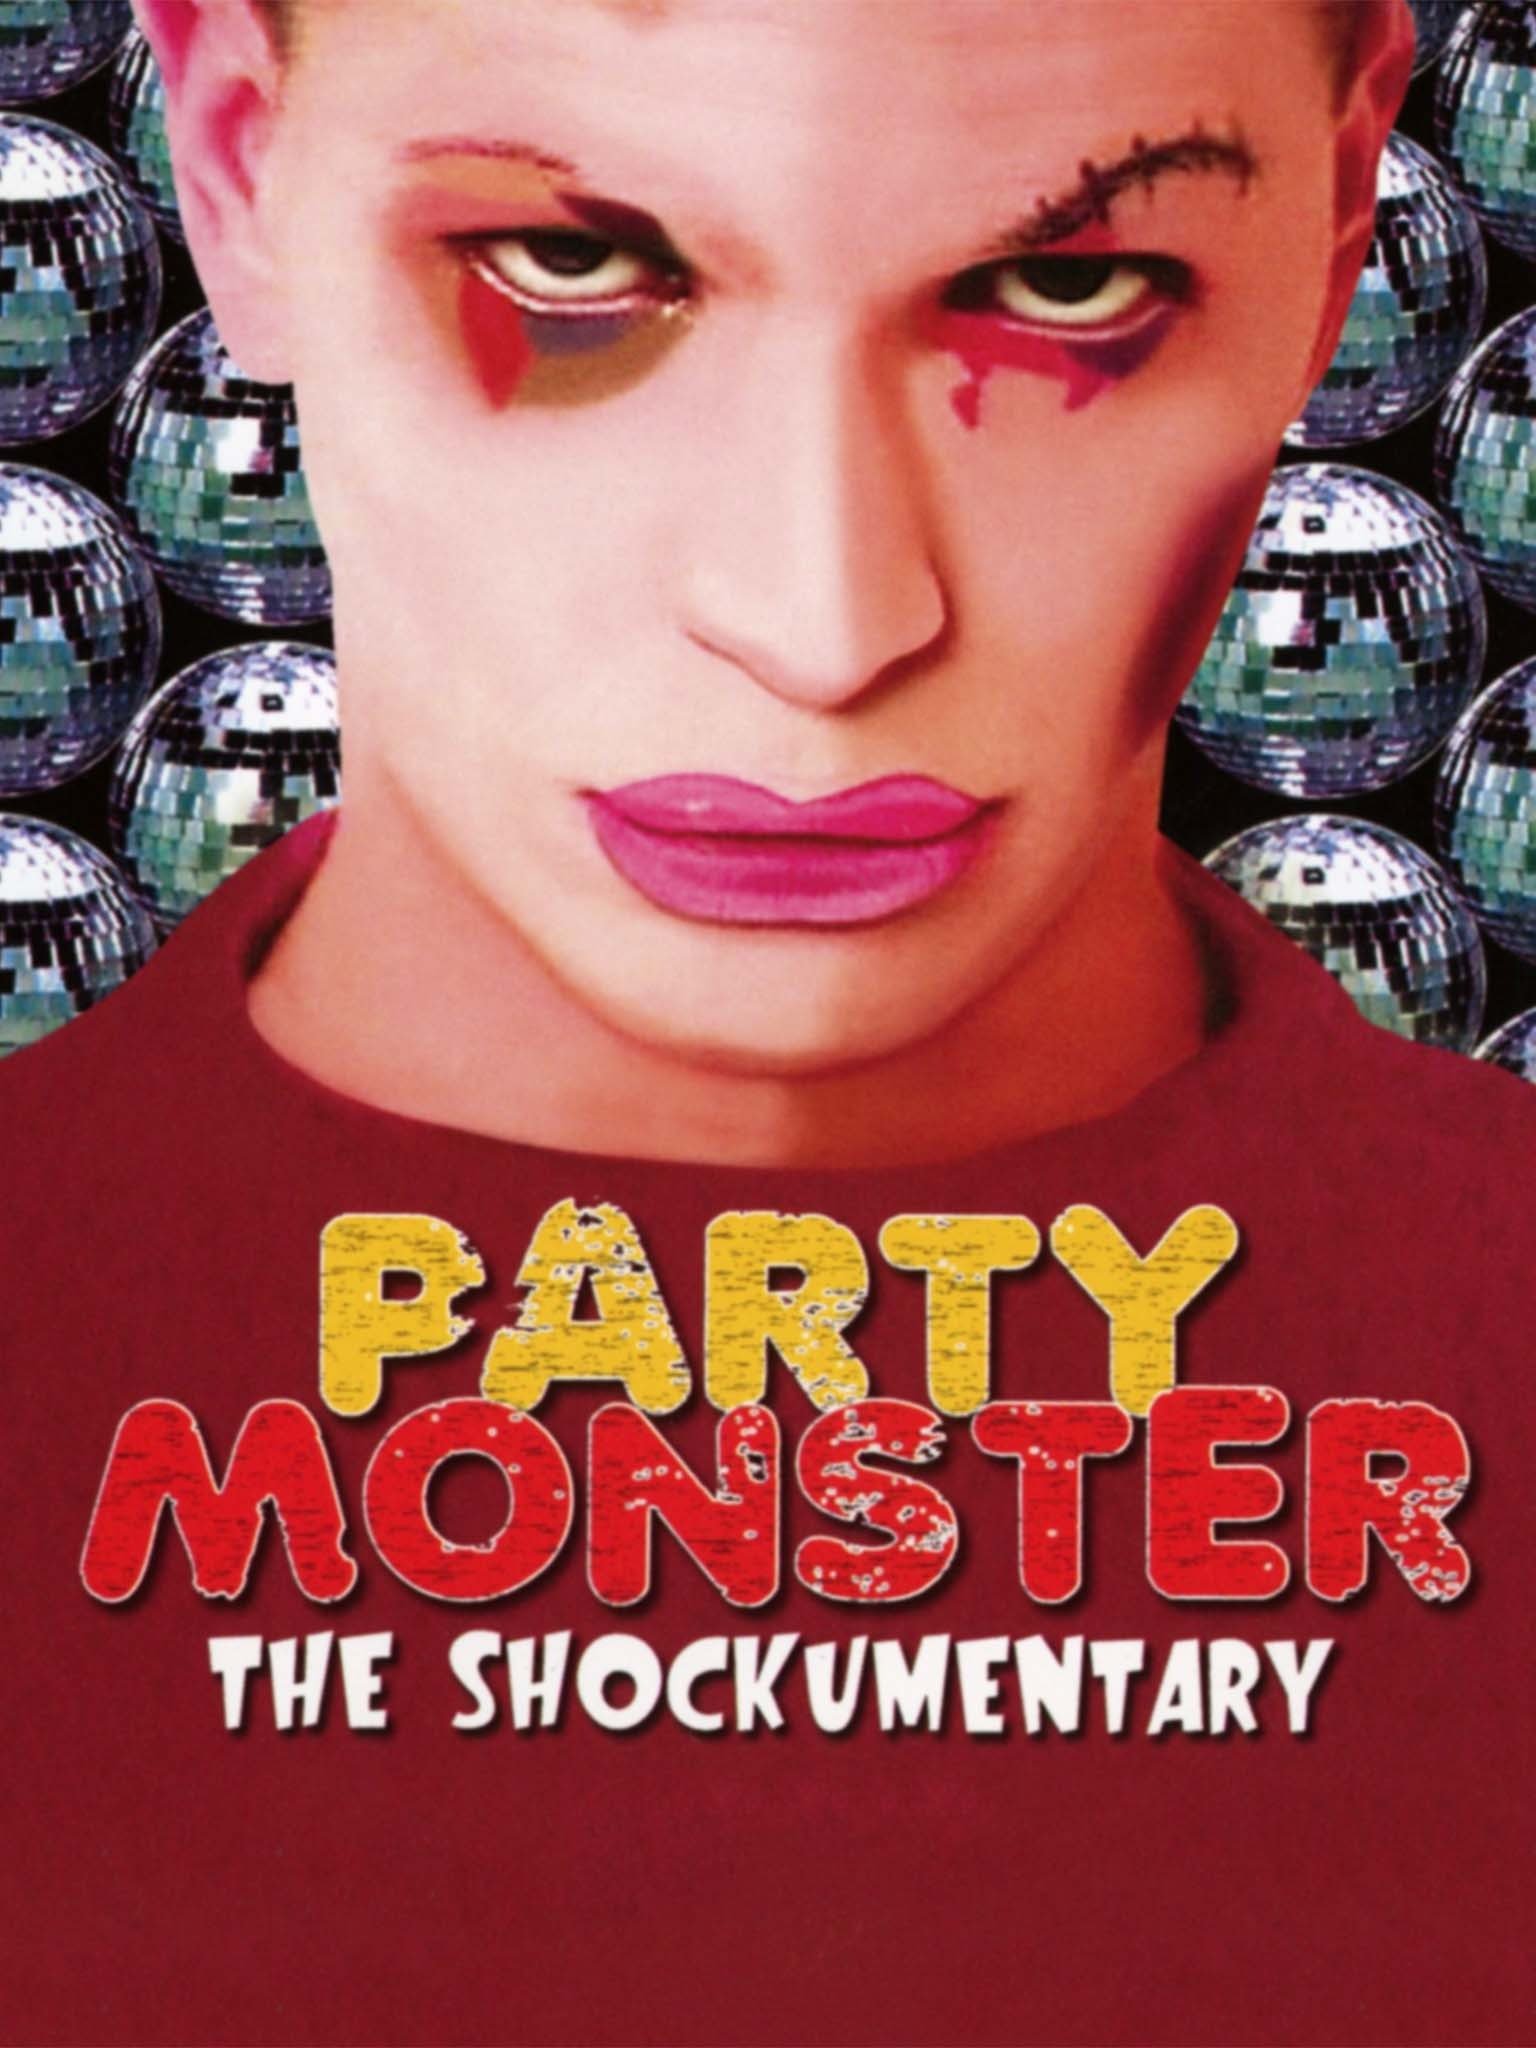 party monster